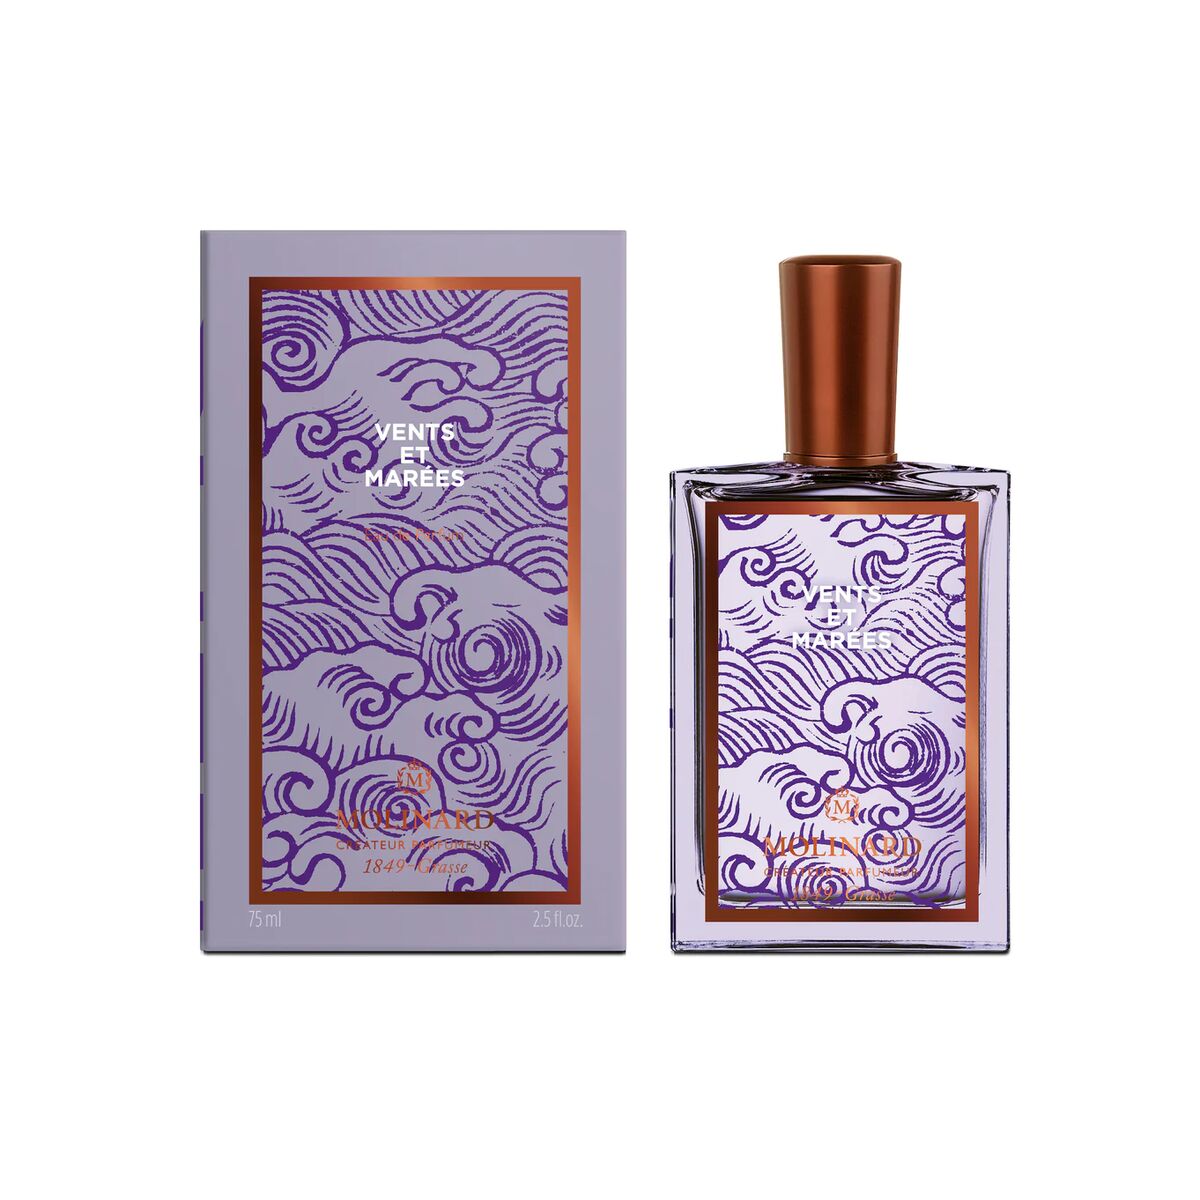 Women's Perfume Molinard winds and tides EDP 75 ml winds and tides